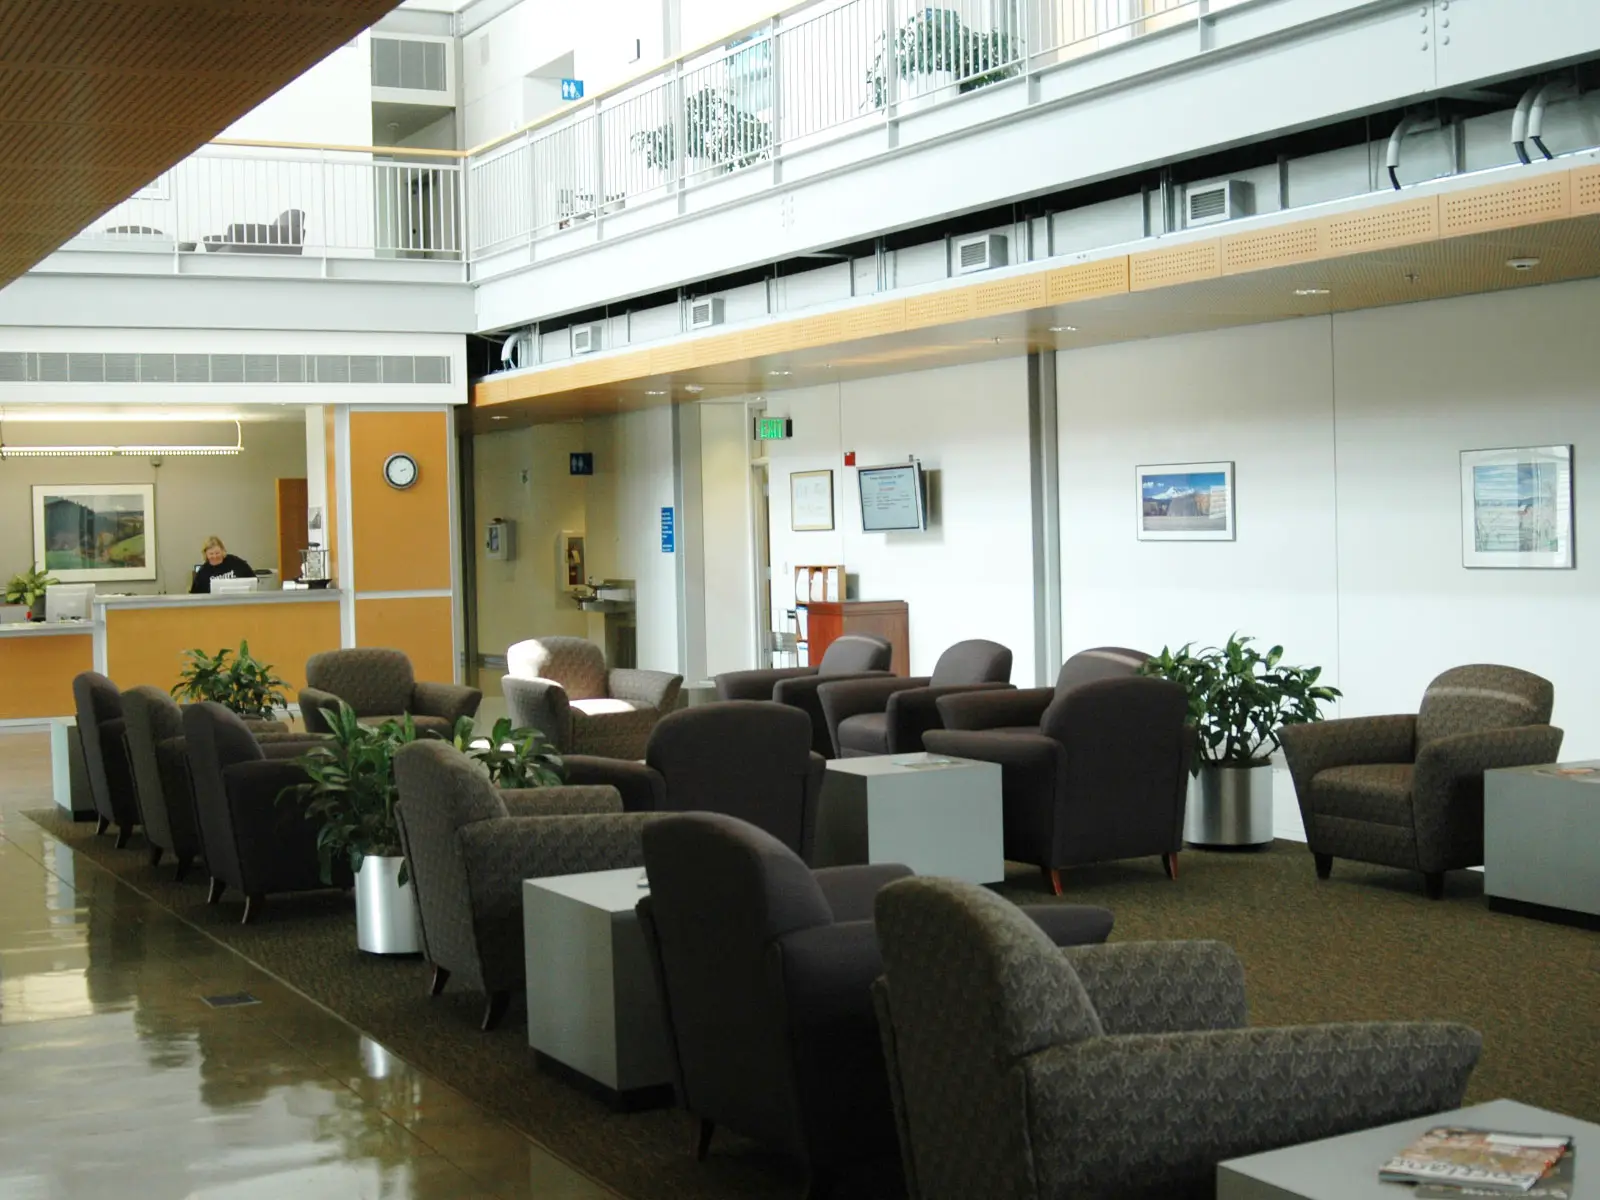 Displays, the front desk and rows of chairs in the lobby and commons gallery of the Wilsonville campus